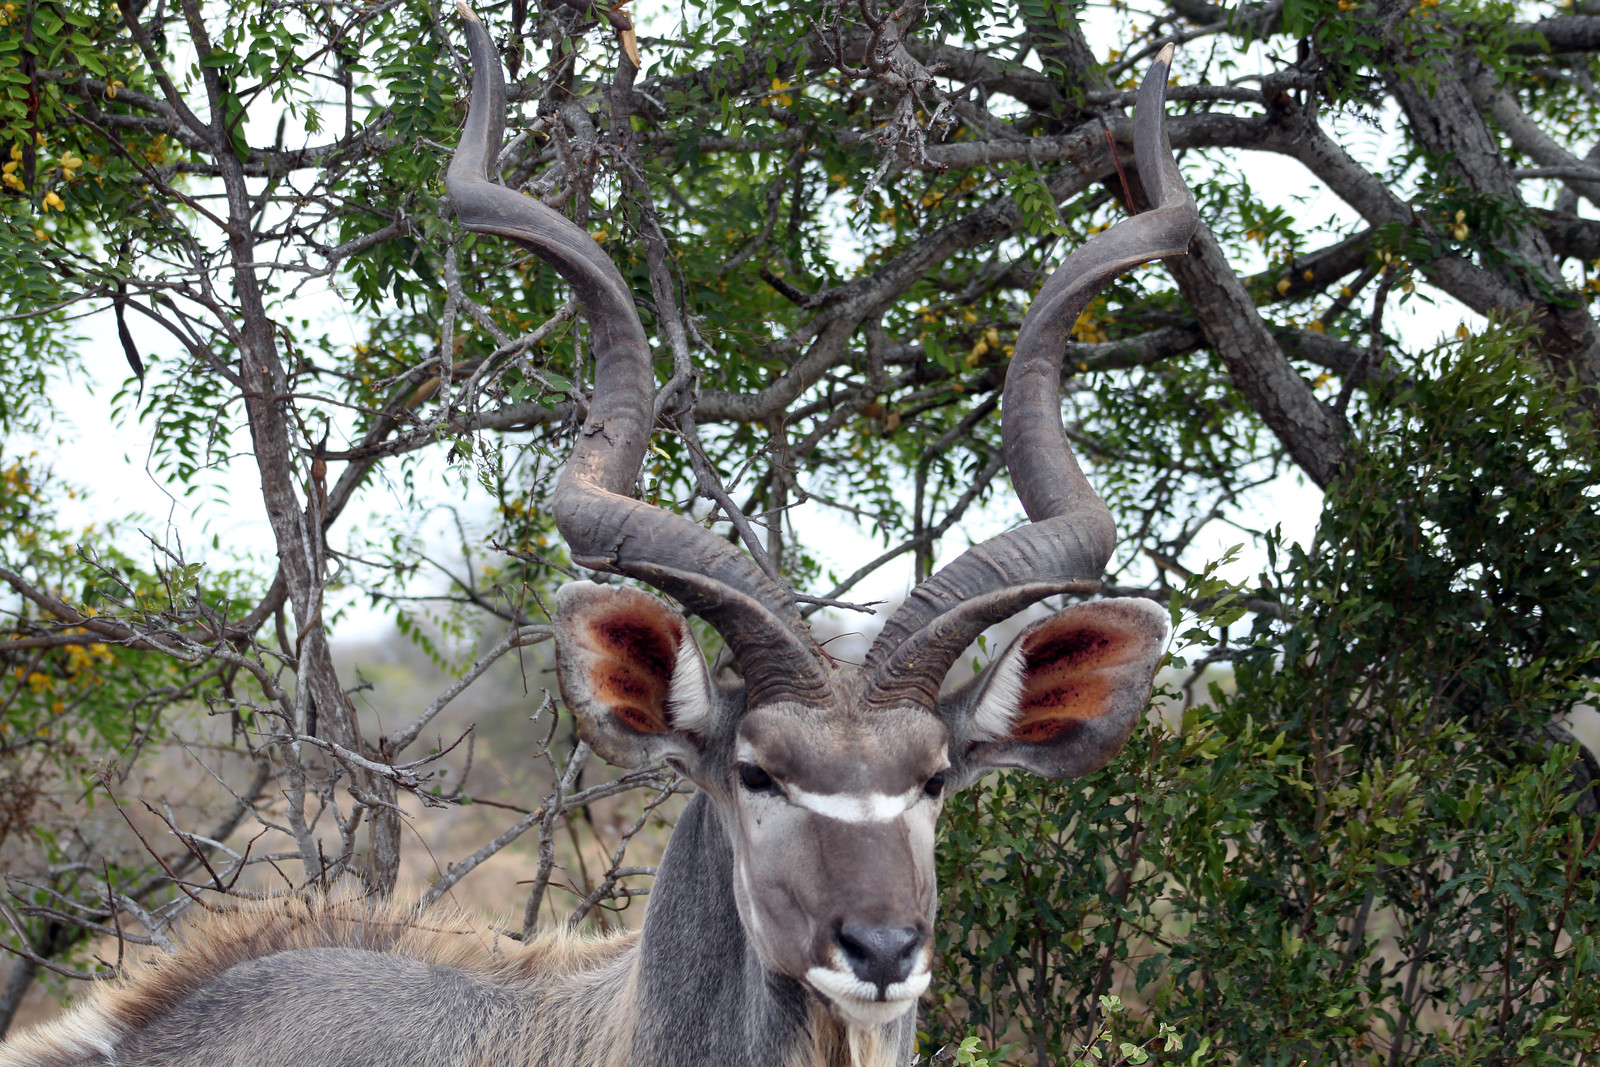 Go To National Park Kruger To Feel The Atmosphere Of African Nature